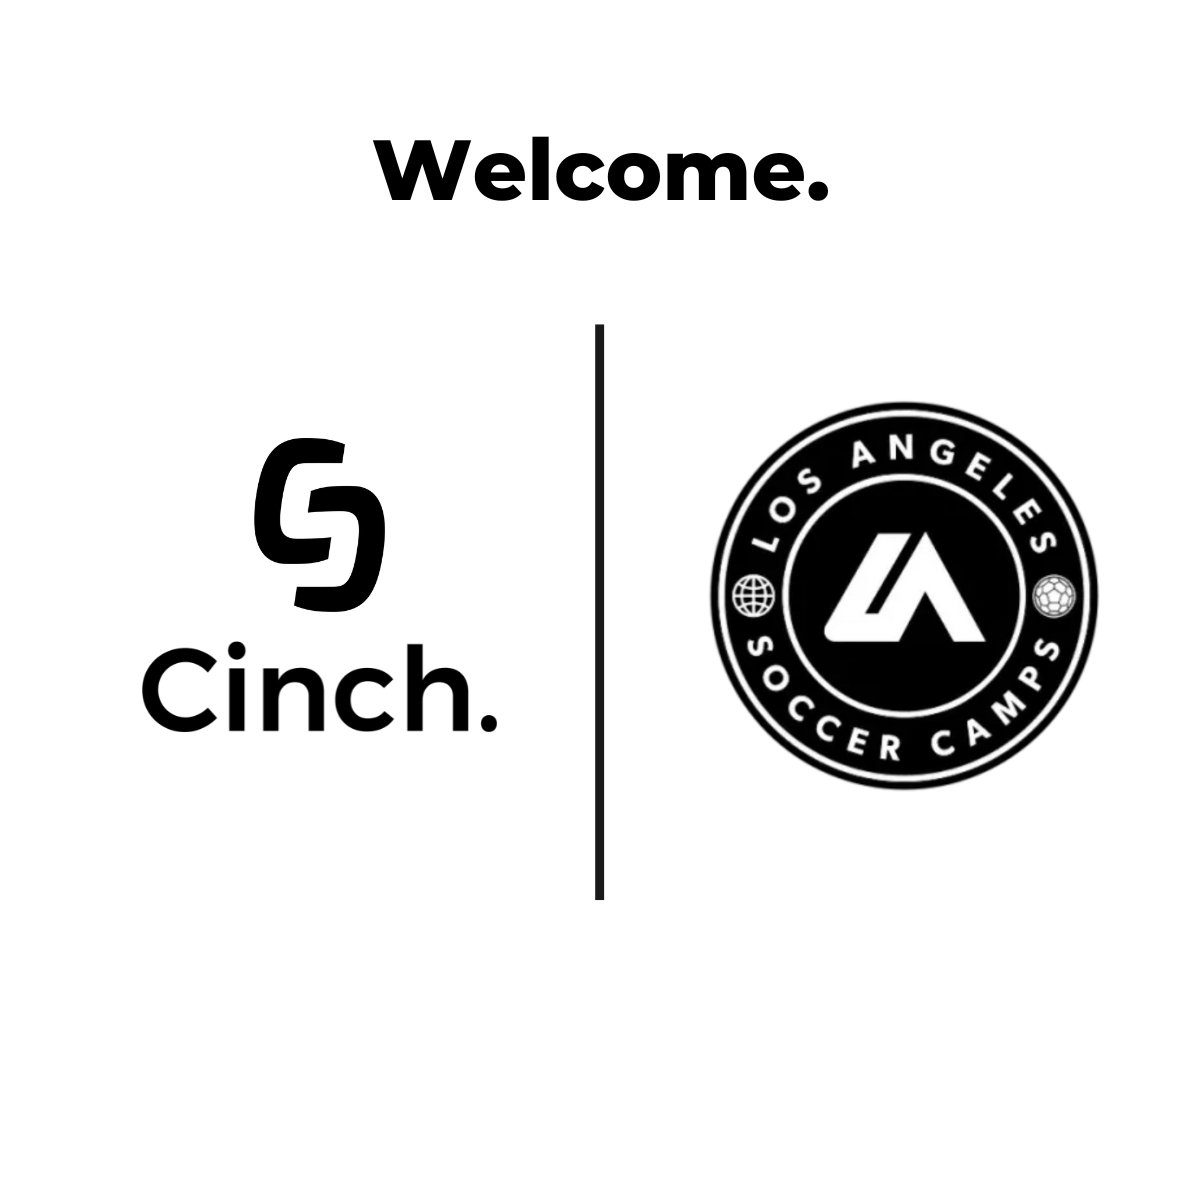 We couldn't be more excited to have LA Soccer Camps join the Cinch Family.  If you are looking for top quality youth soccer camps in the LA area this is the place to go!

#sports #youthsports #soccer #soccercamps #dc ##losangeles #youthsoccer #soccertraining #youth #cinch #camps